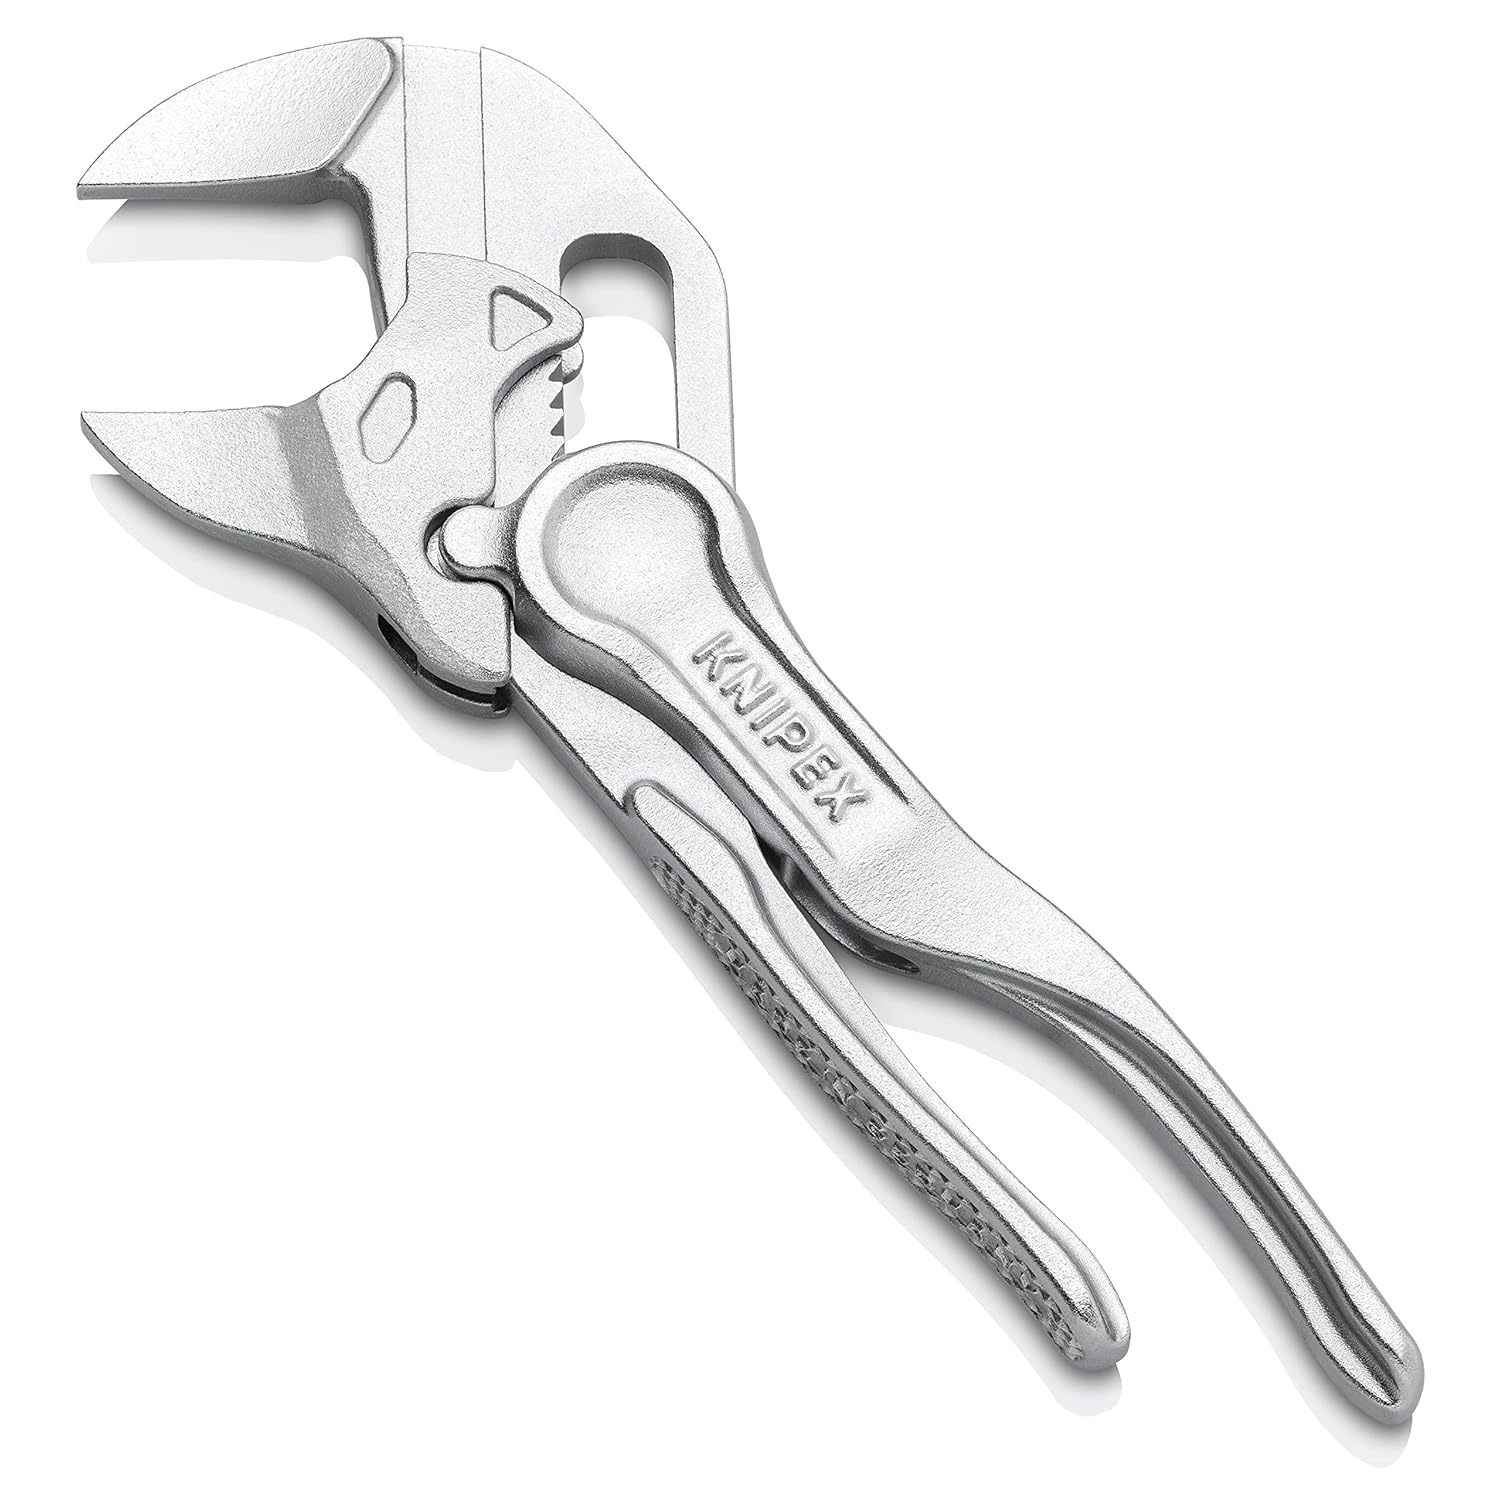 Knipex 86-04-100 Pliers Wrench XS - $85.49